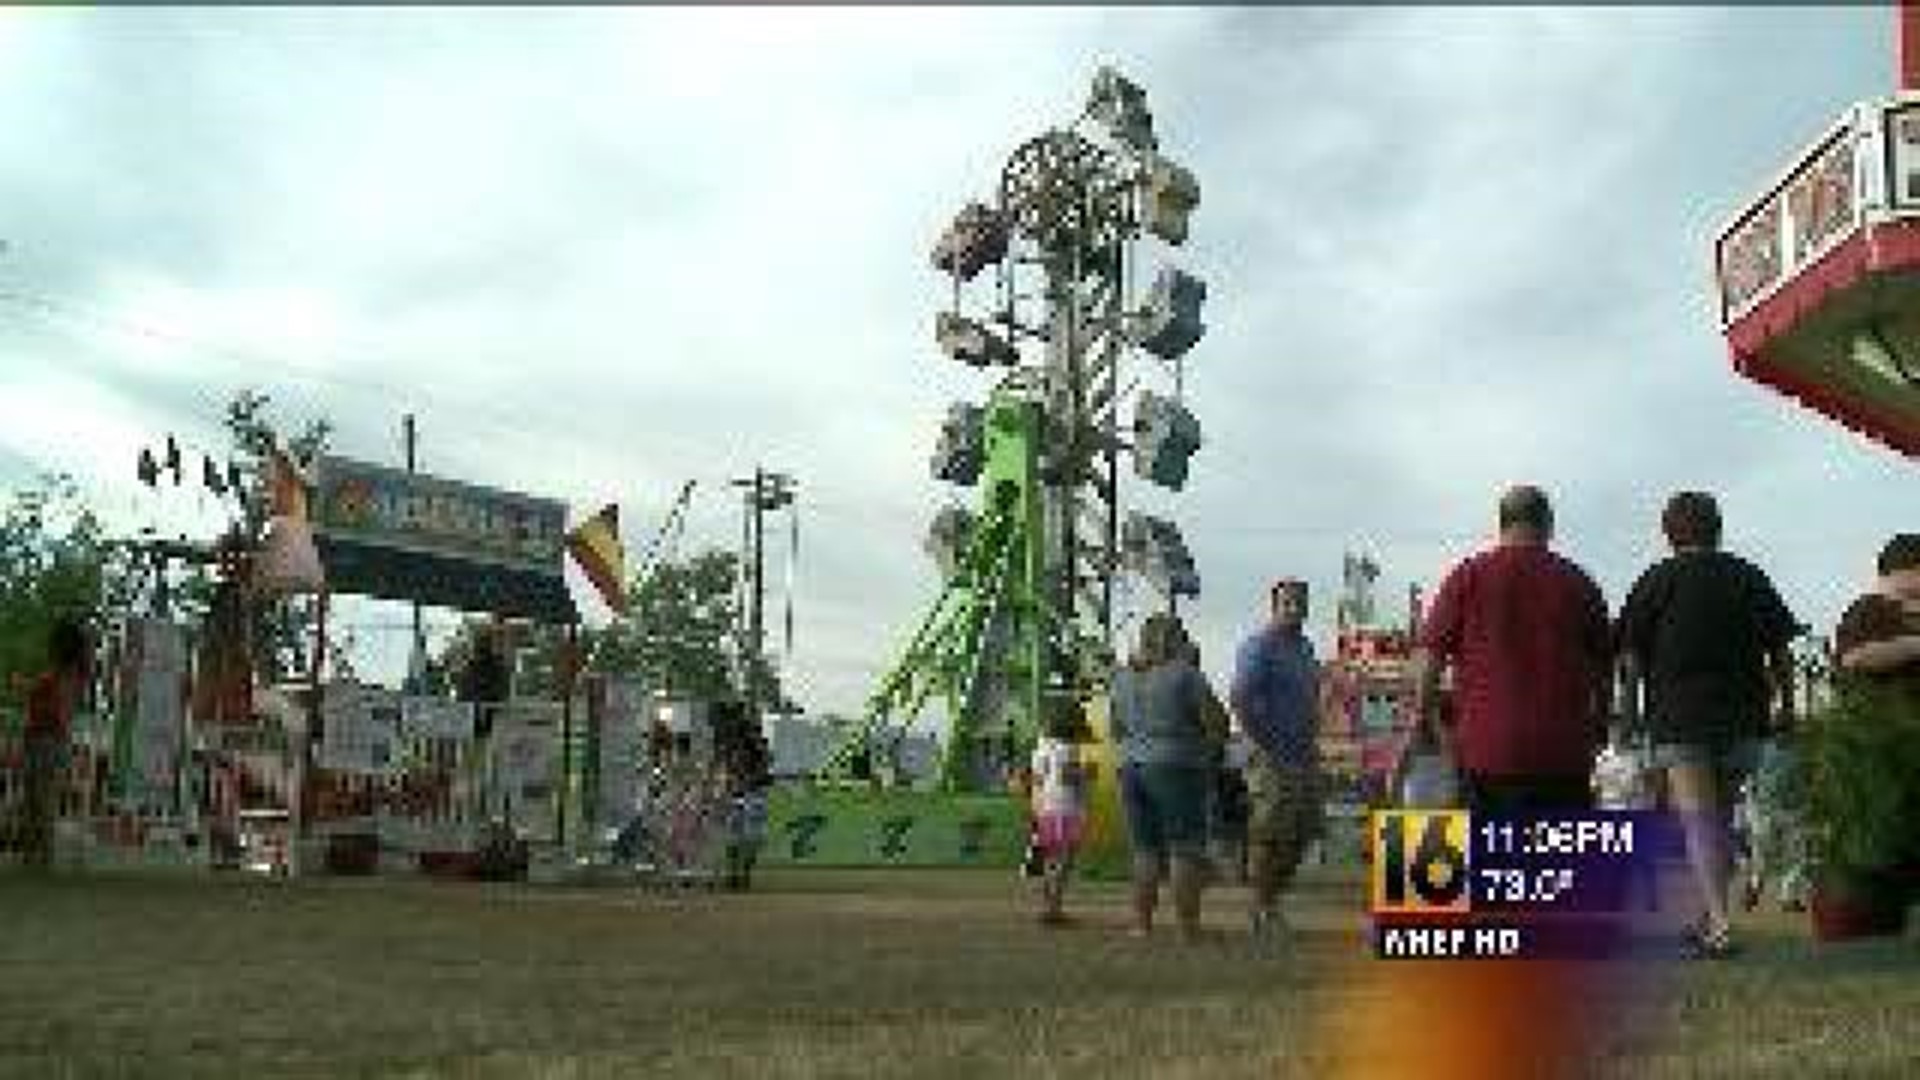 Carnival Provides Good Time For Good Cause